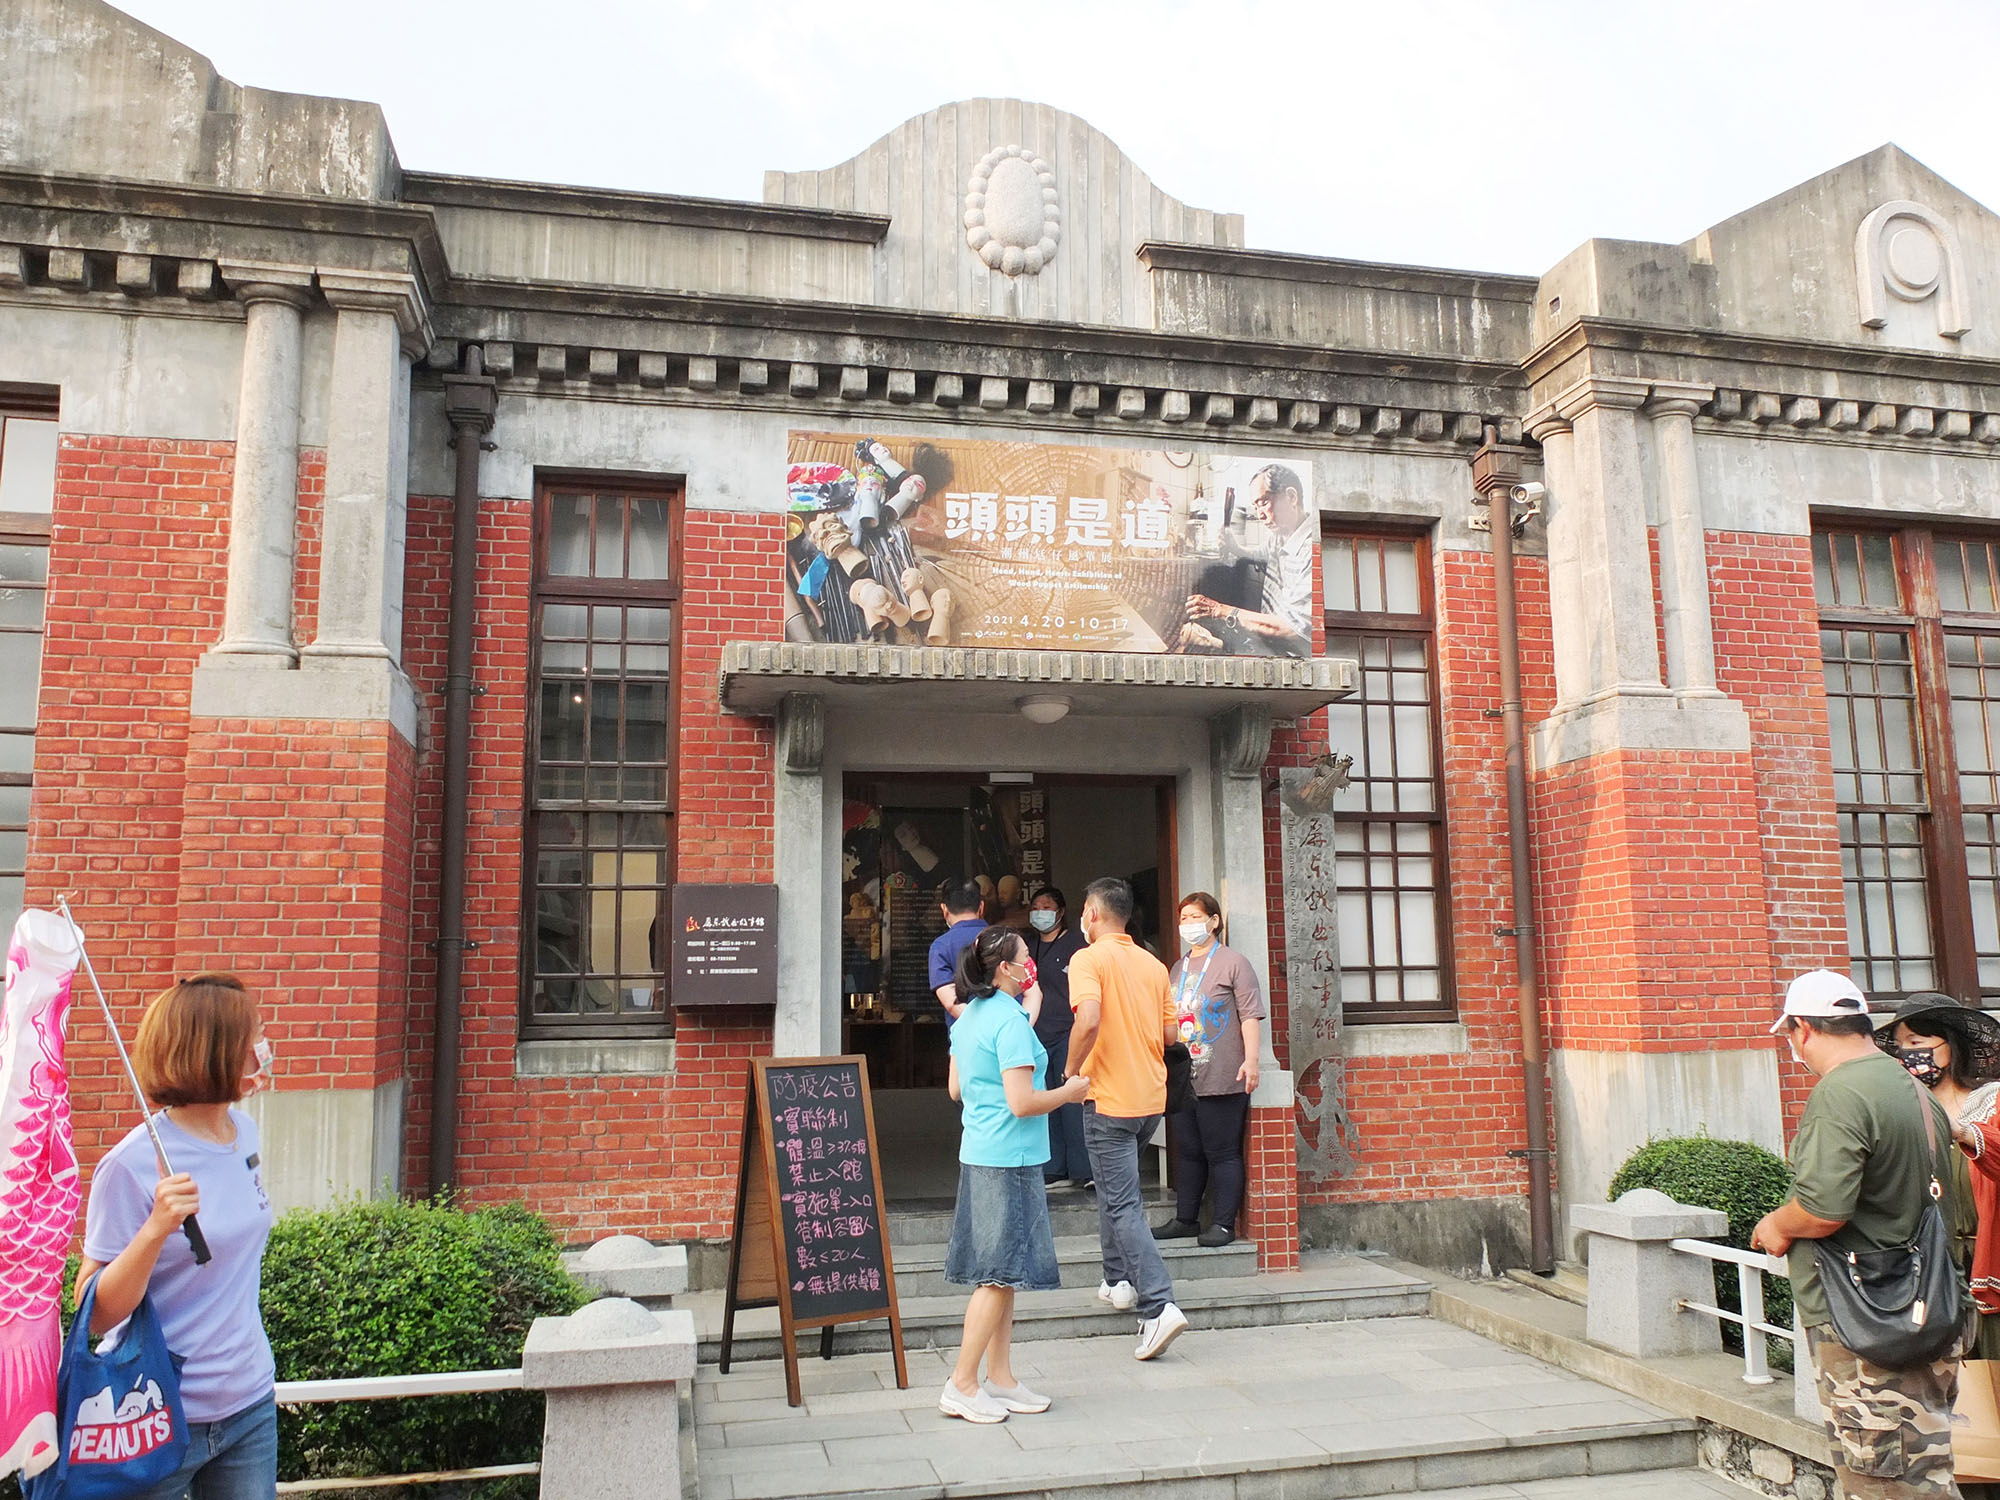 The Pingtung Opera Story House